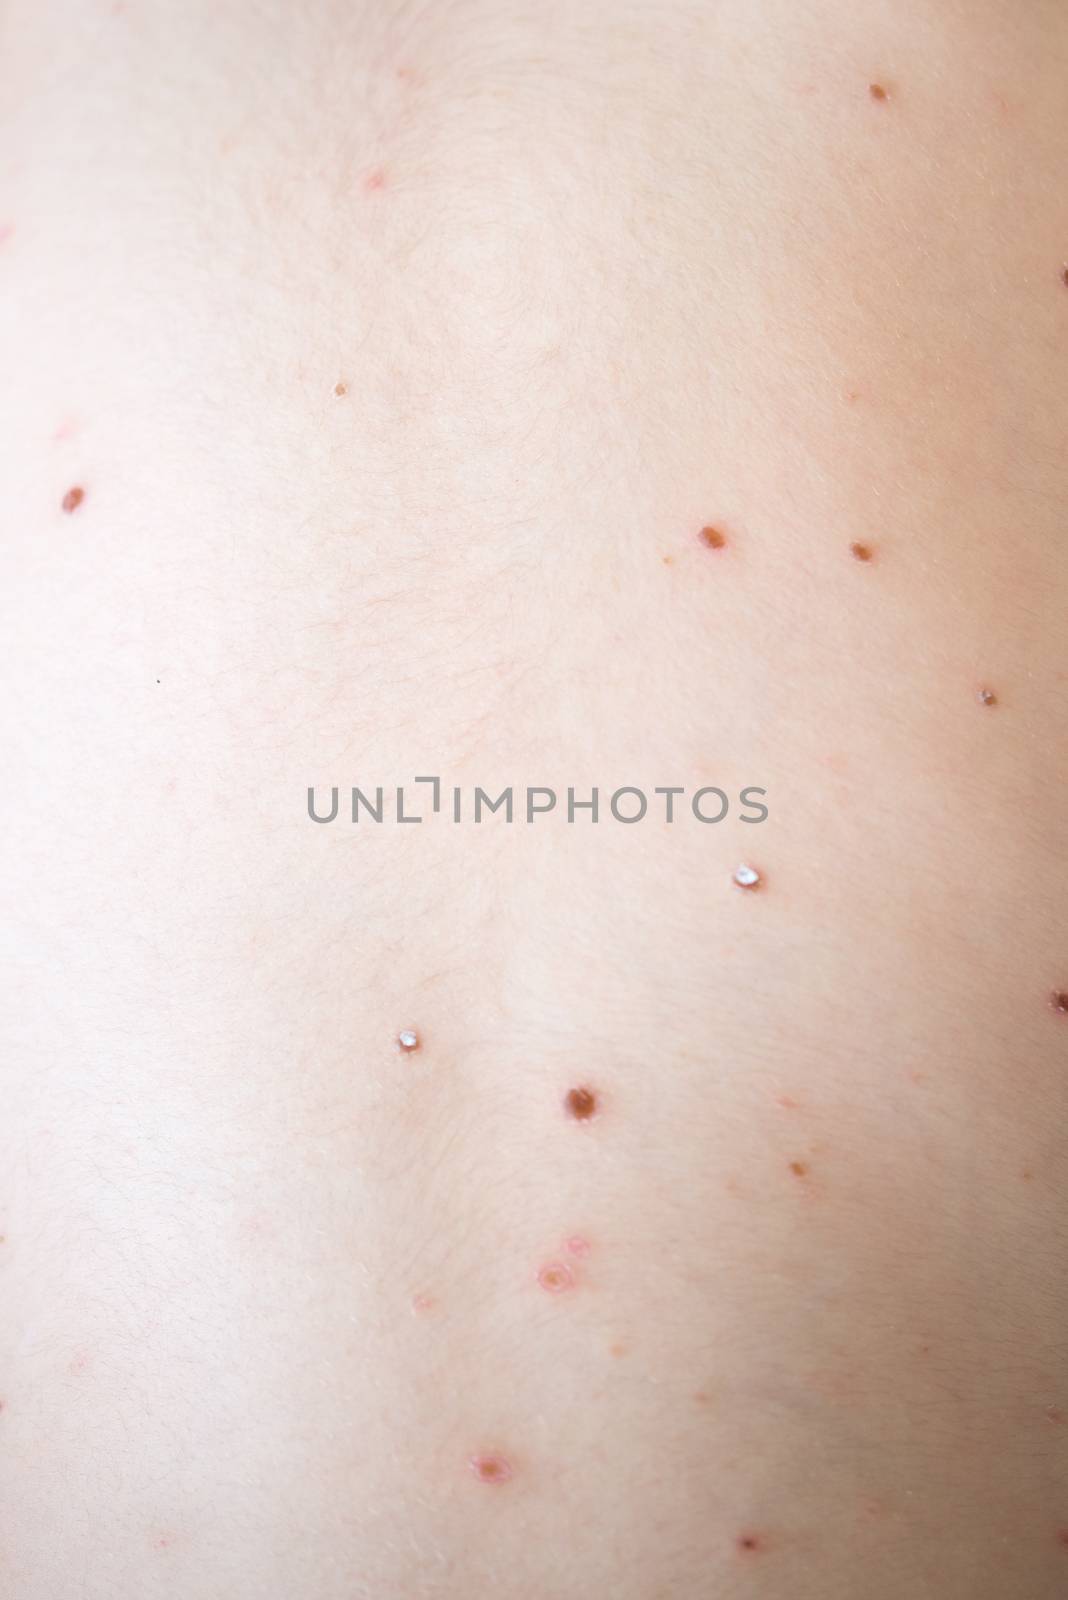 Chickenpox on the body of the little child by asafaric